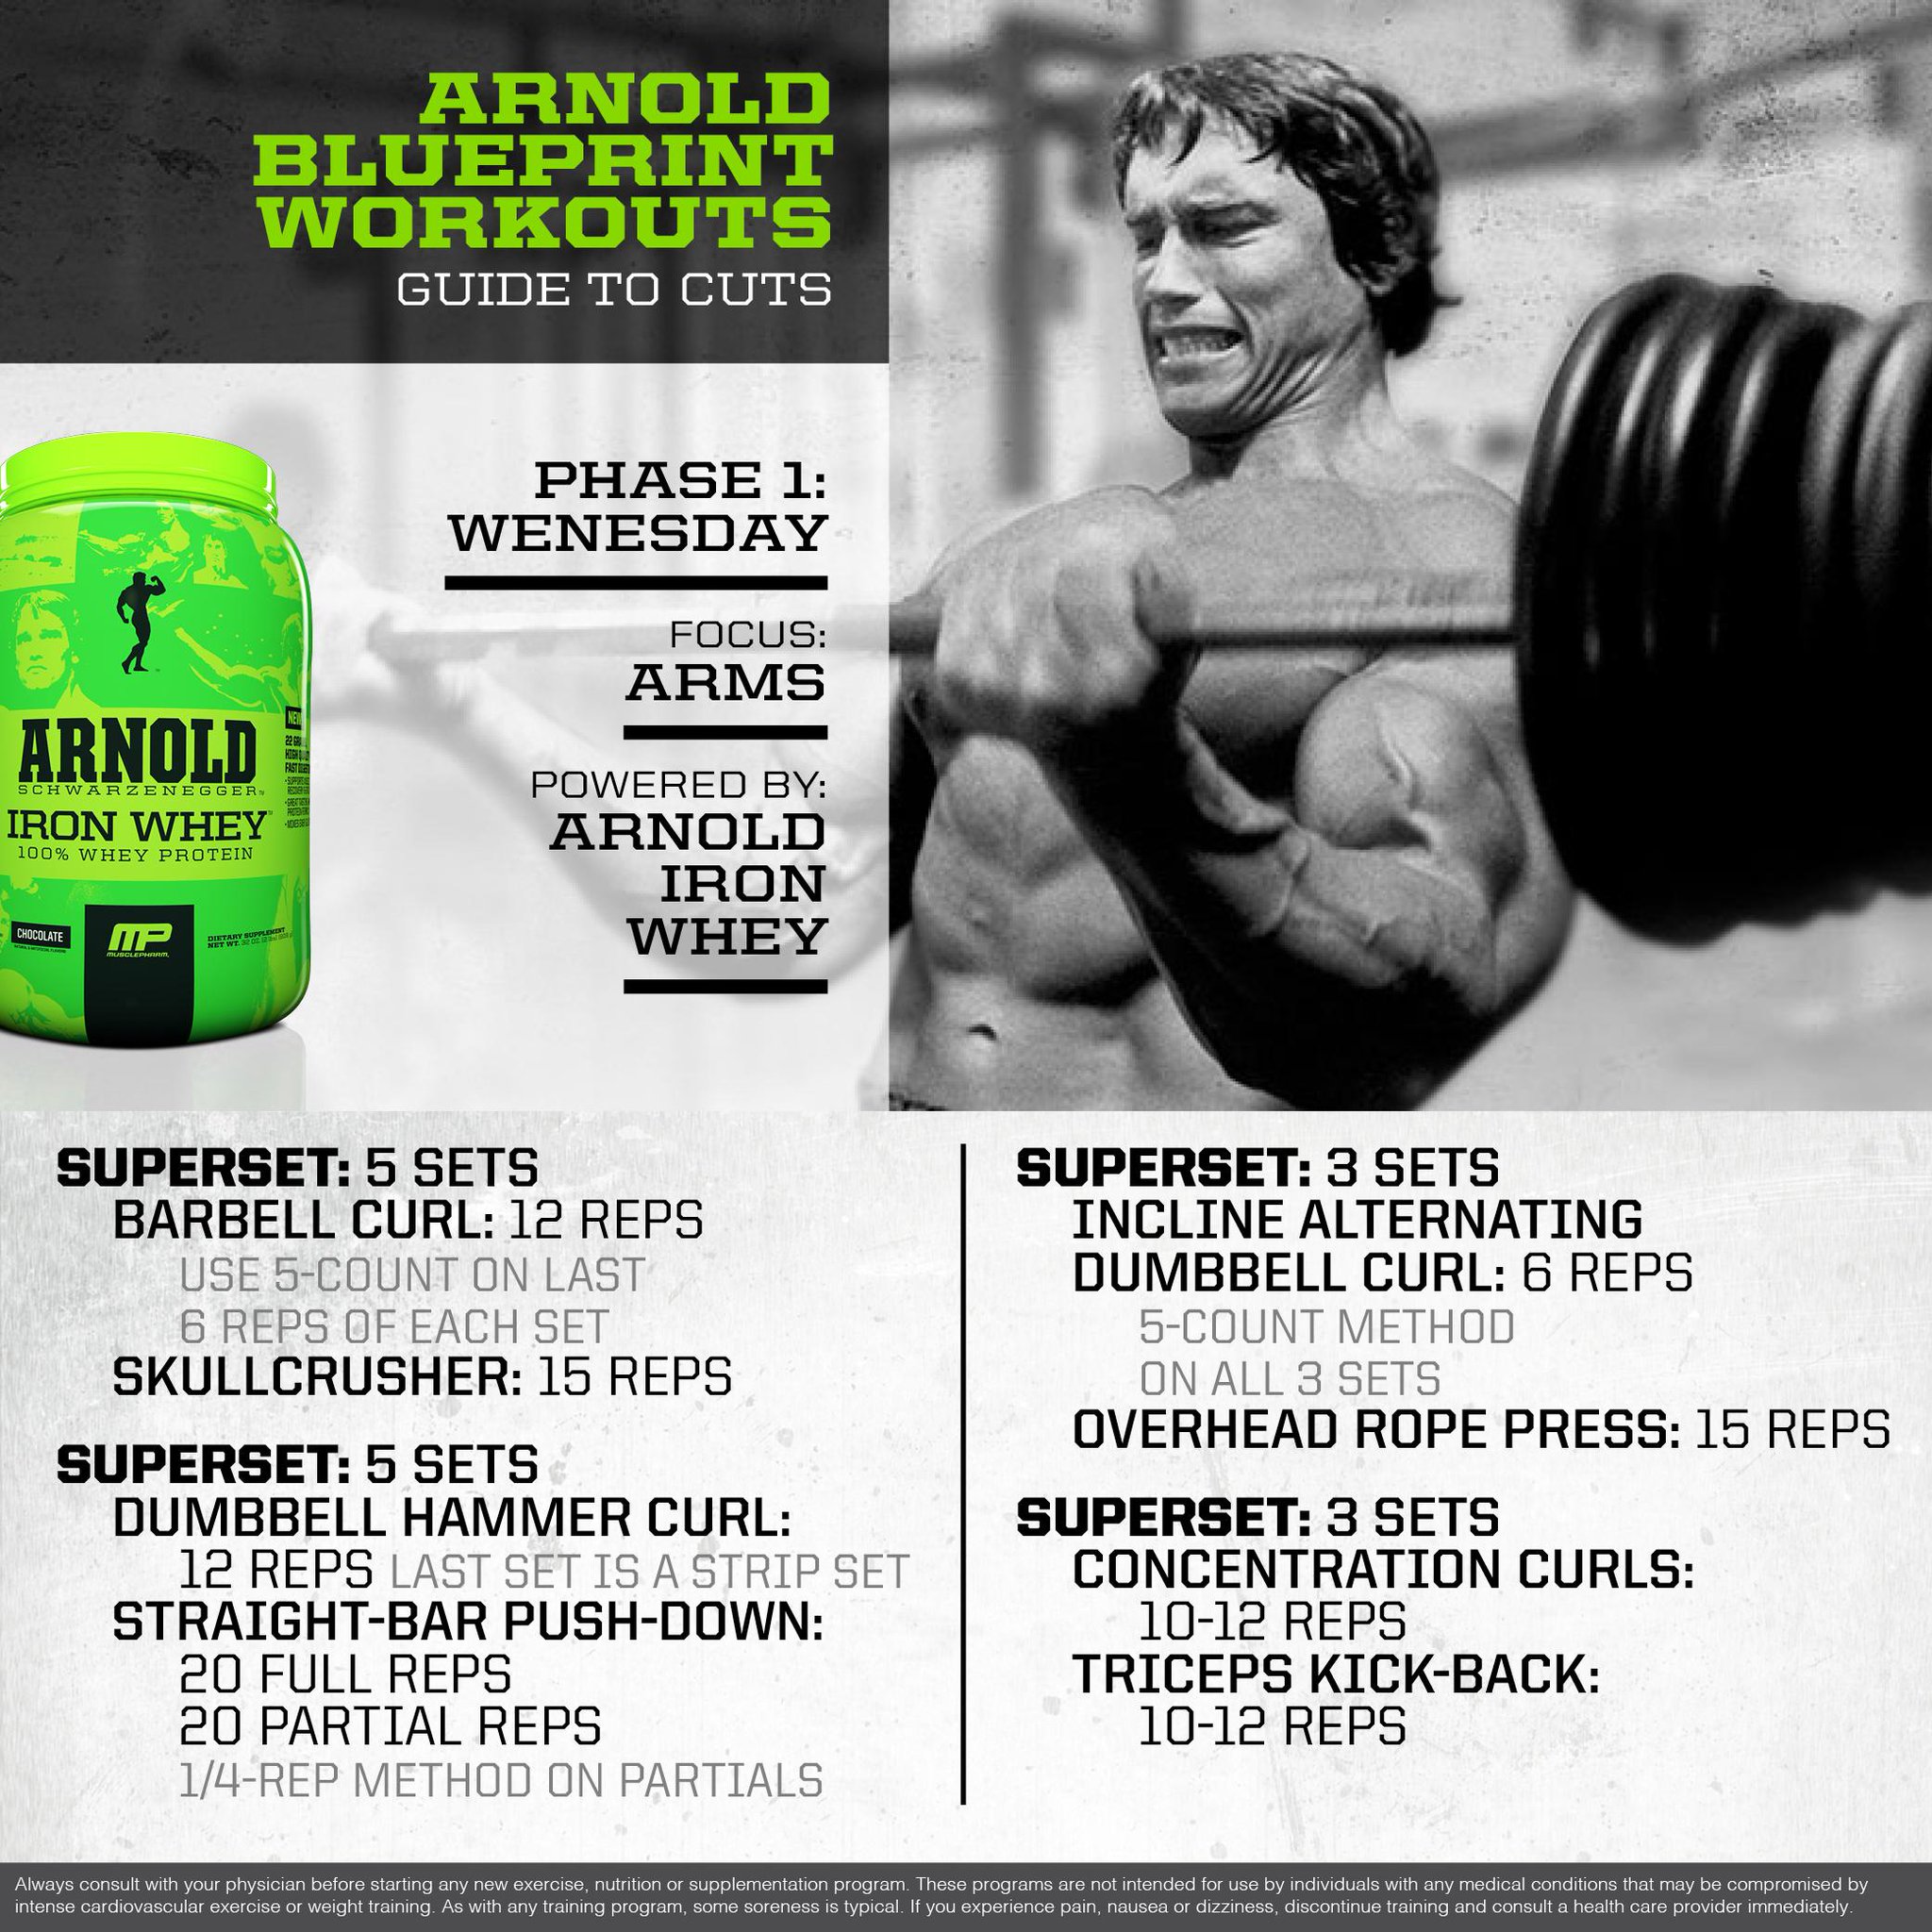 15 Minute Arnold Forearm Workout for Build Muscle